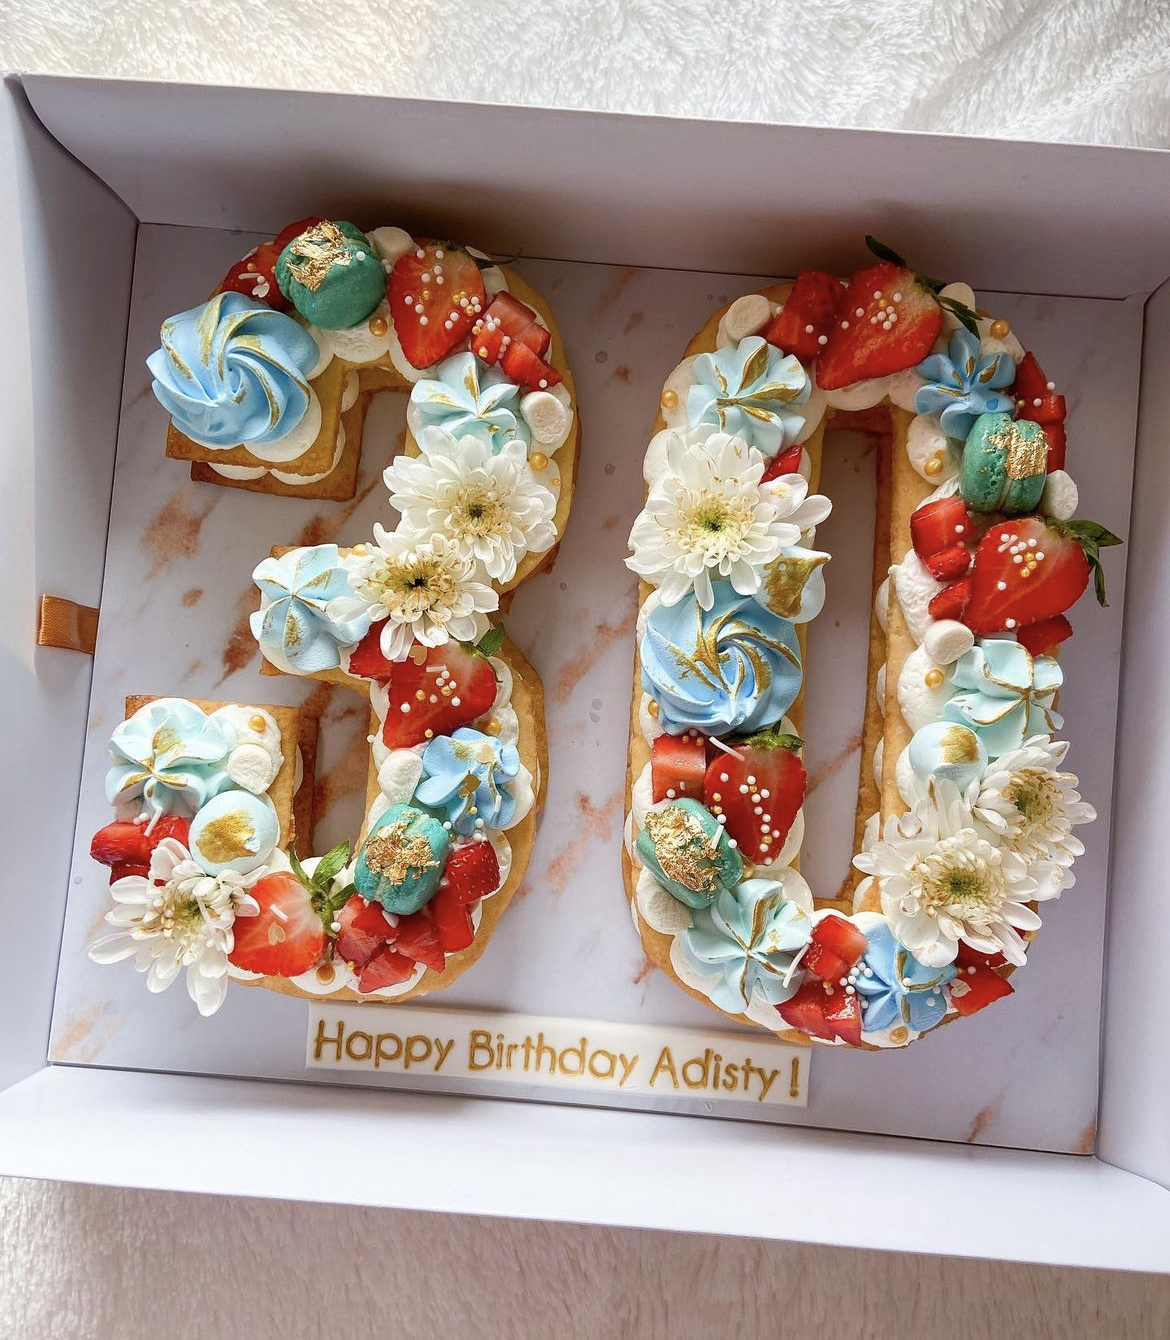 Letter and Number Cakes